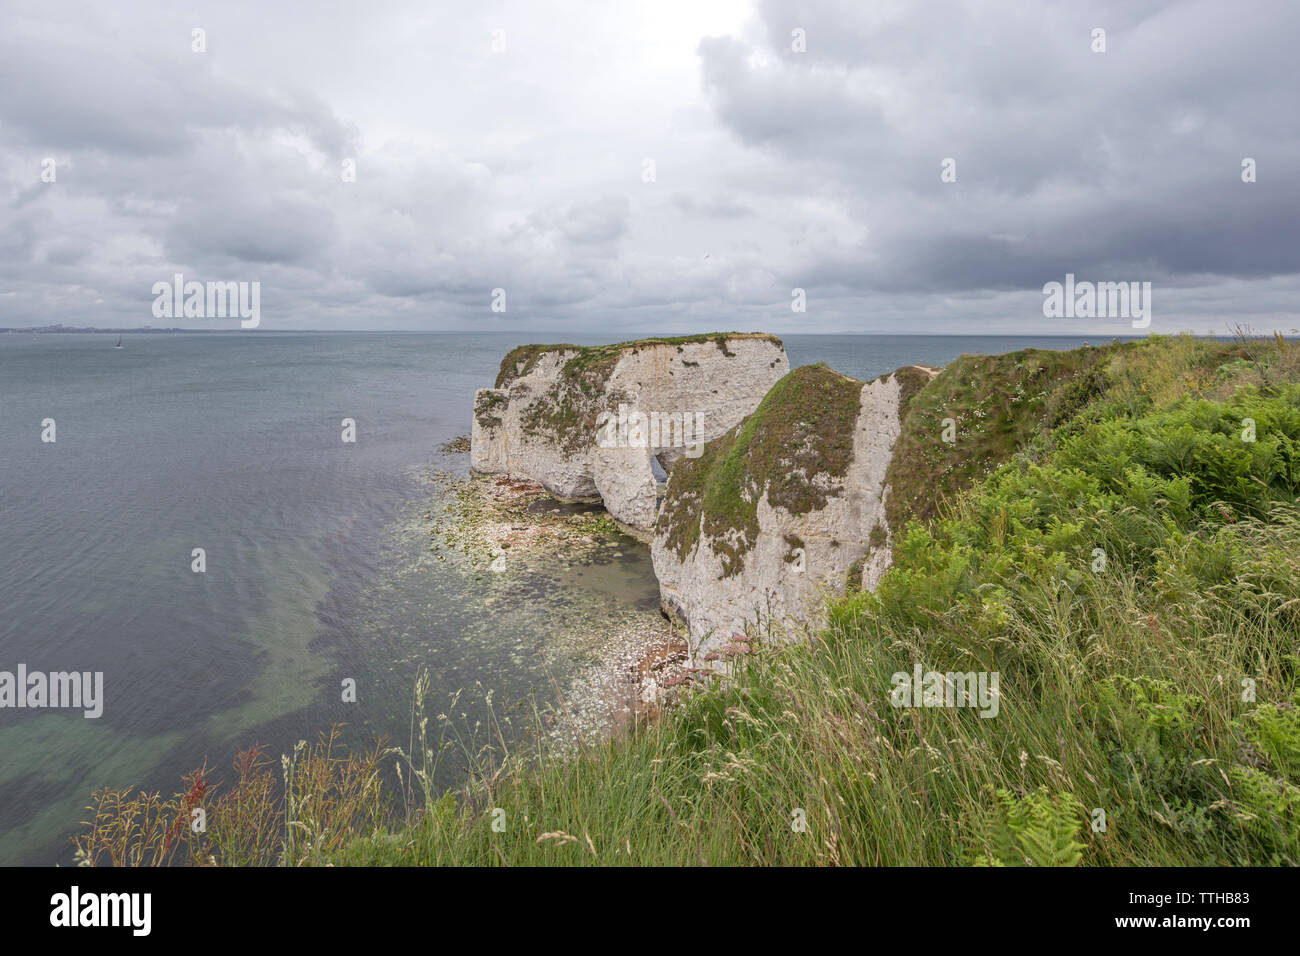 Old Harry Rocks at Handfast Point, Isle of Purbeck, Jurassic Coast, a UNESCO World Heritage Site in Dorset, England, UK Stock Photo